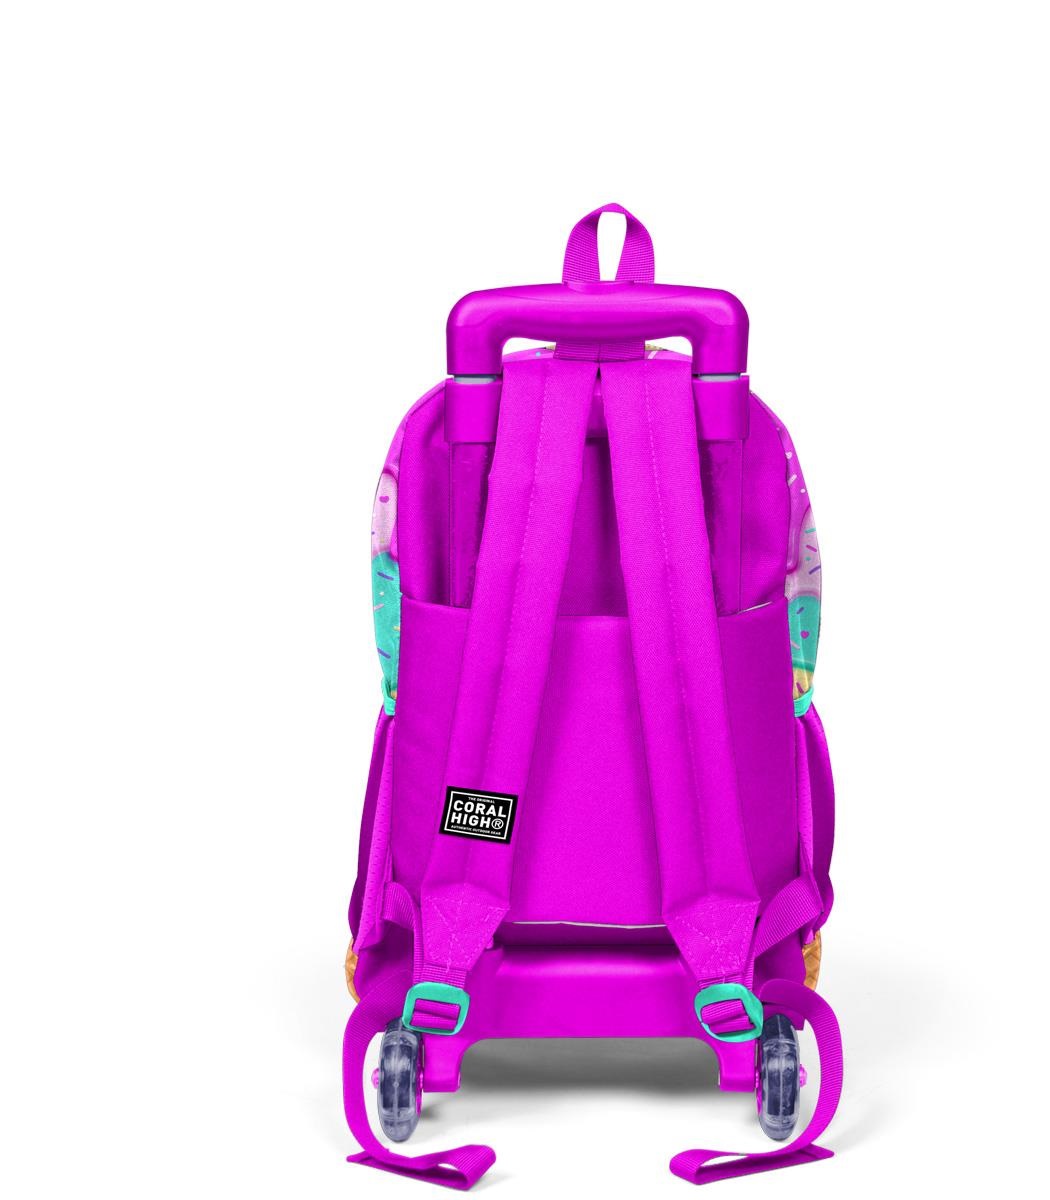 Coral High Kids Three Compartment Squeegee School Backpack - Pink Colorful Ice Cream Patterned